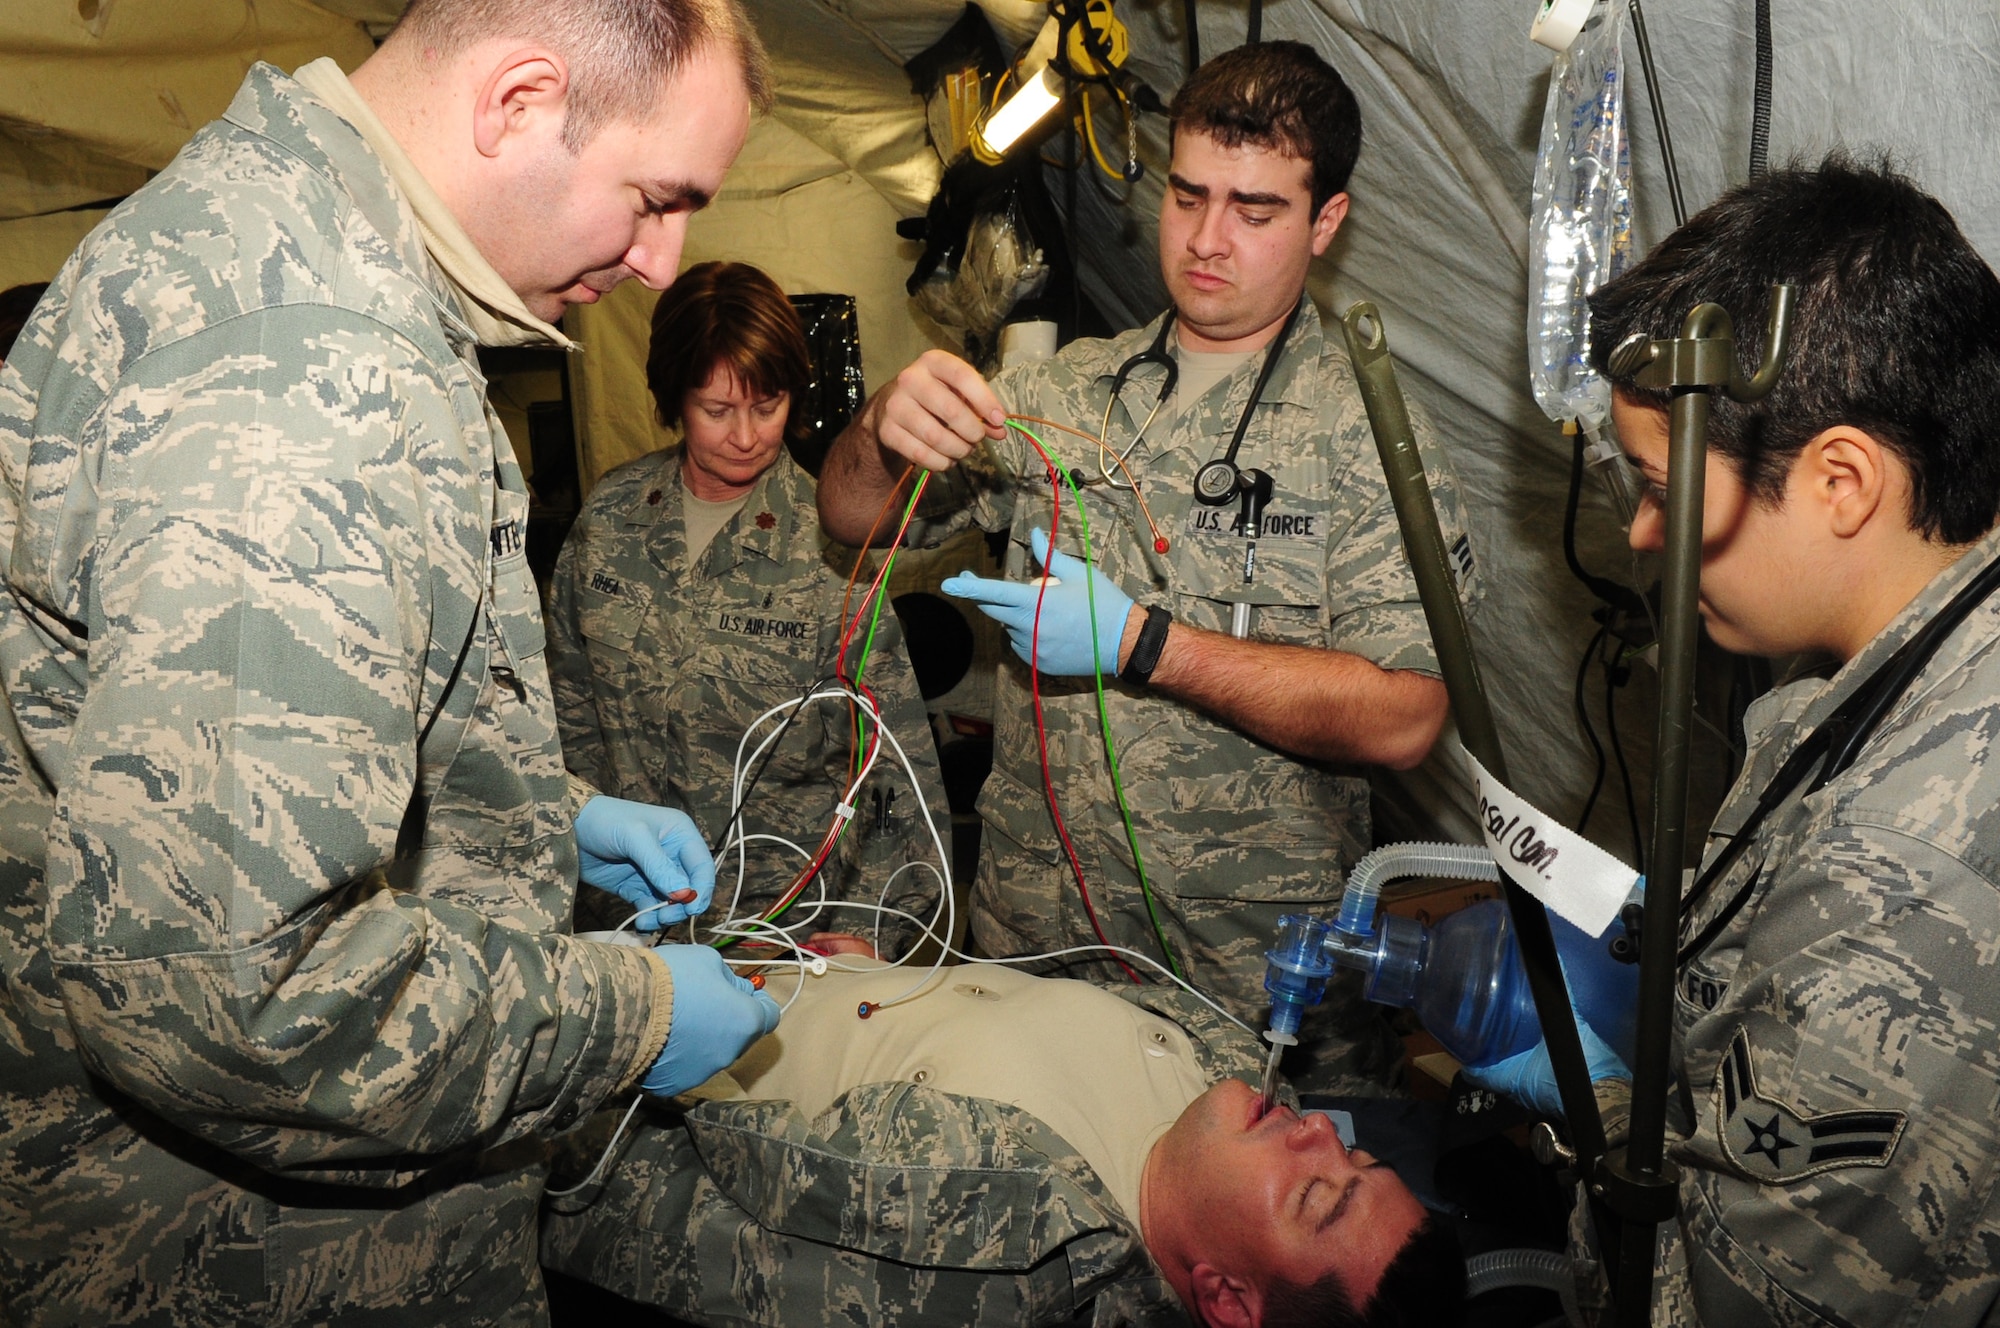 Medics try to resuscitate an Airman during an expeditionary Medical Support Exercise, Ramstein Air Base, Dec. 01, 2011. EMEDS was a week-long exercise for the 86th and 31st Medical Group to hone their skills in a mock-deployed environment. (U.S. Air Force photo by Senior Airman Aaron-Forrest Wainwright)